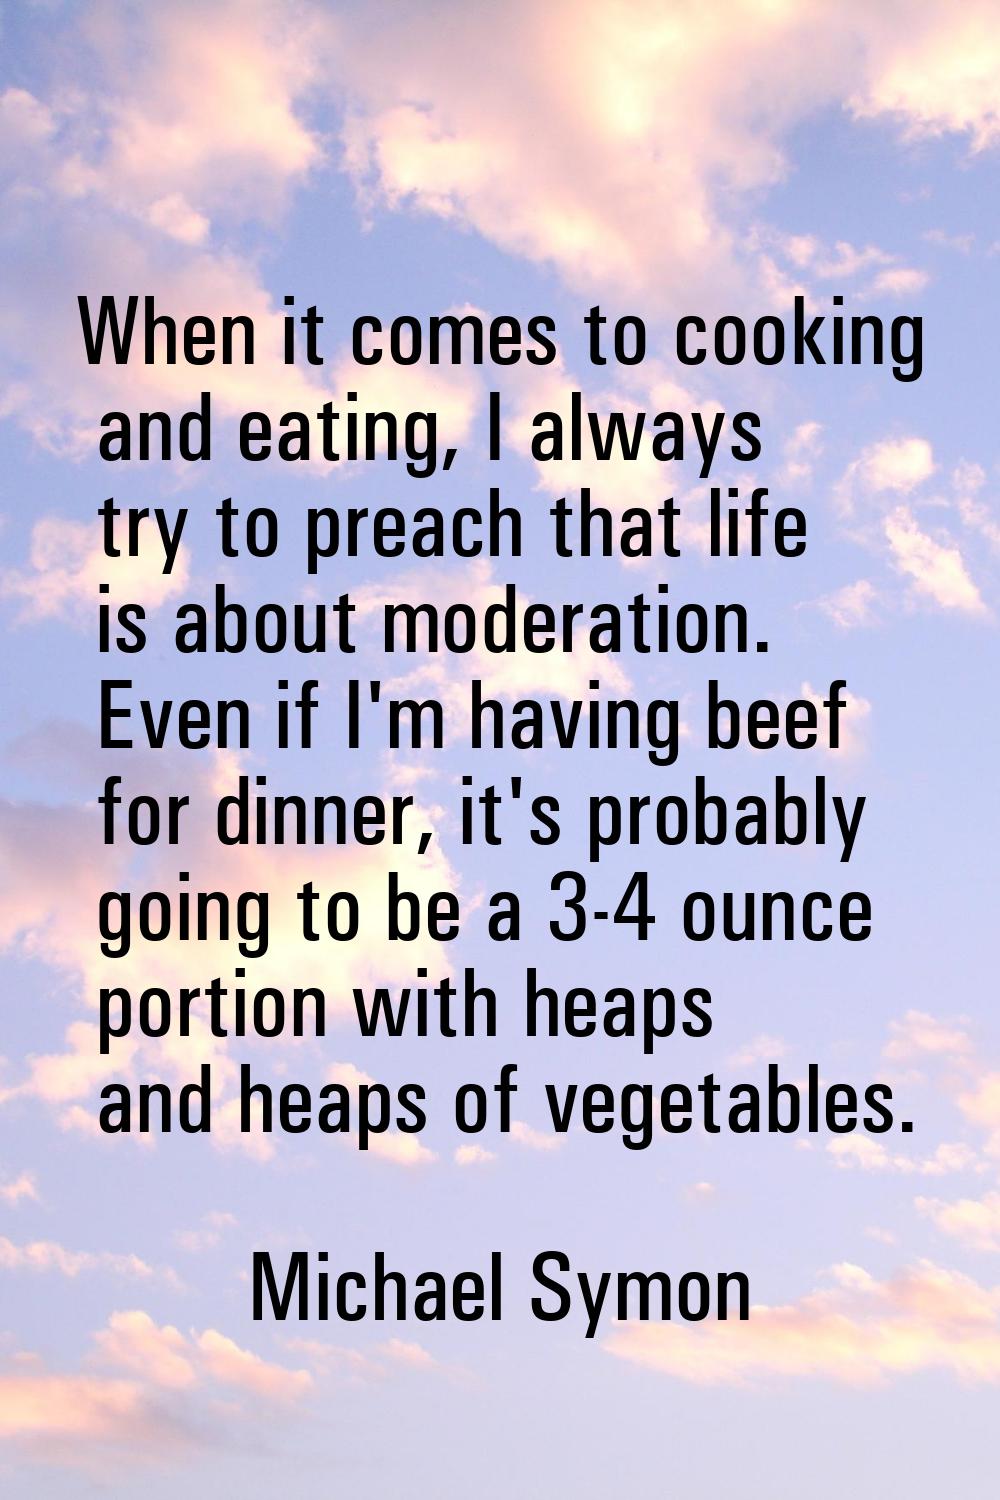 When it comes to cooking and eating, I always try to preach that life is about moderation. Even if 